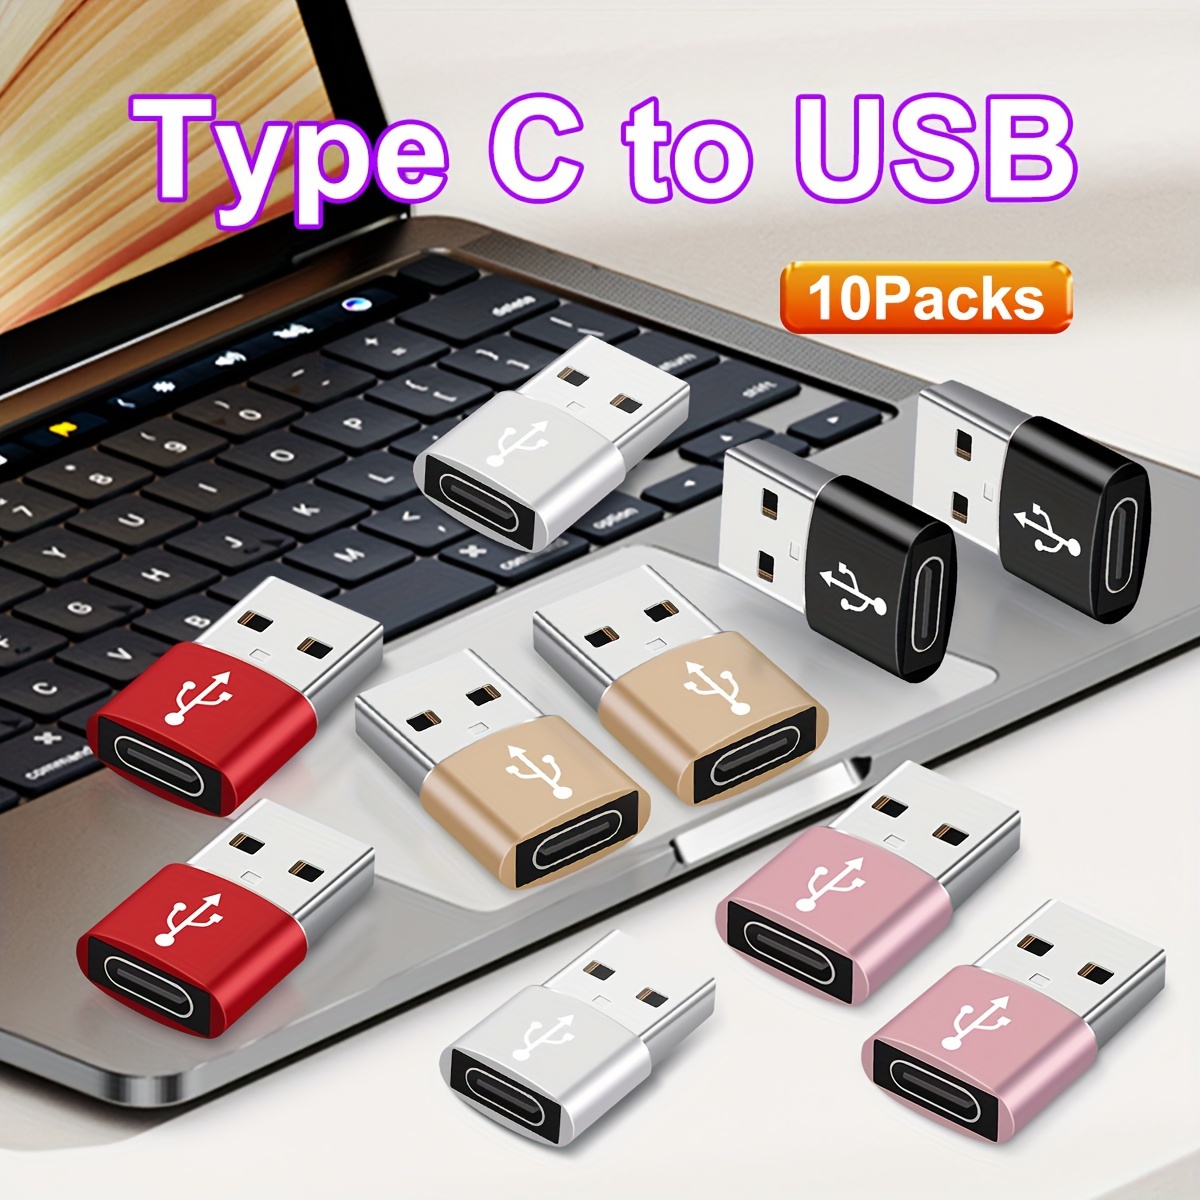 

10-pack Usb C Female To Usb Male Otg Adapters, Type-c To Usb A Charging Converters, Compatible With , Samsung Galaxy, Iwatch, Airpods, Pro - Plastic Matte Finish, High-speed Data Transfer